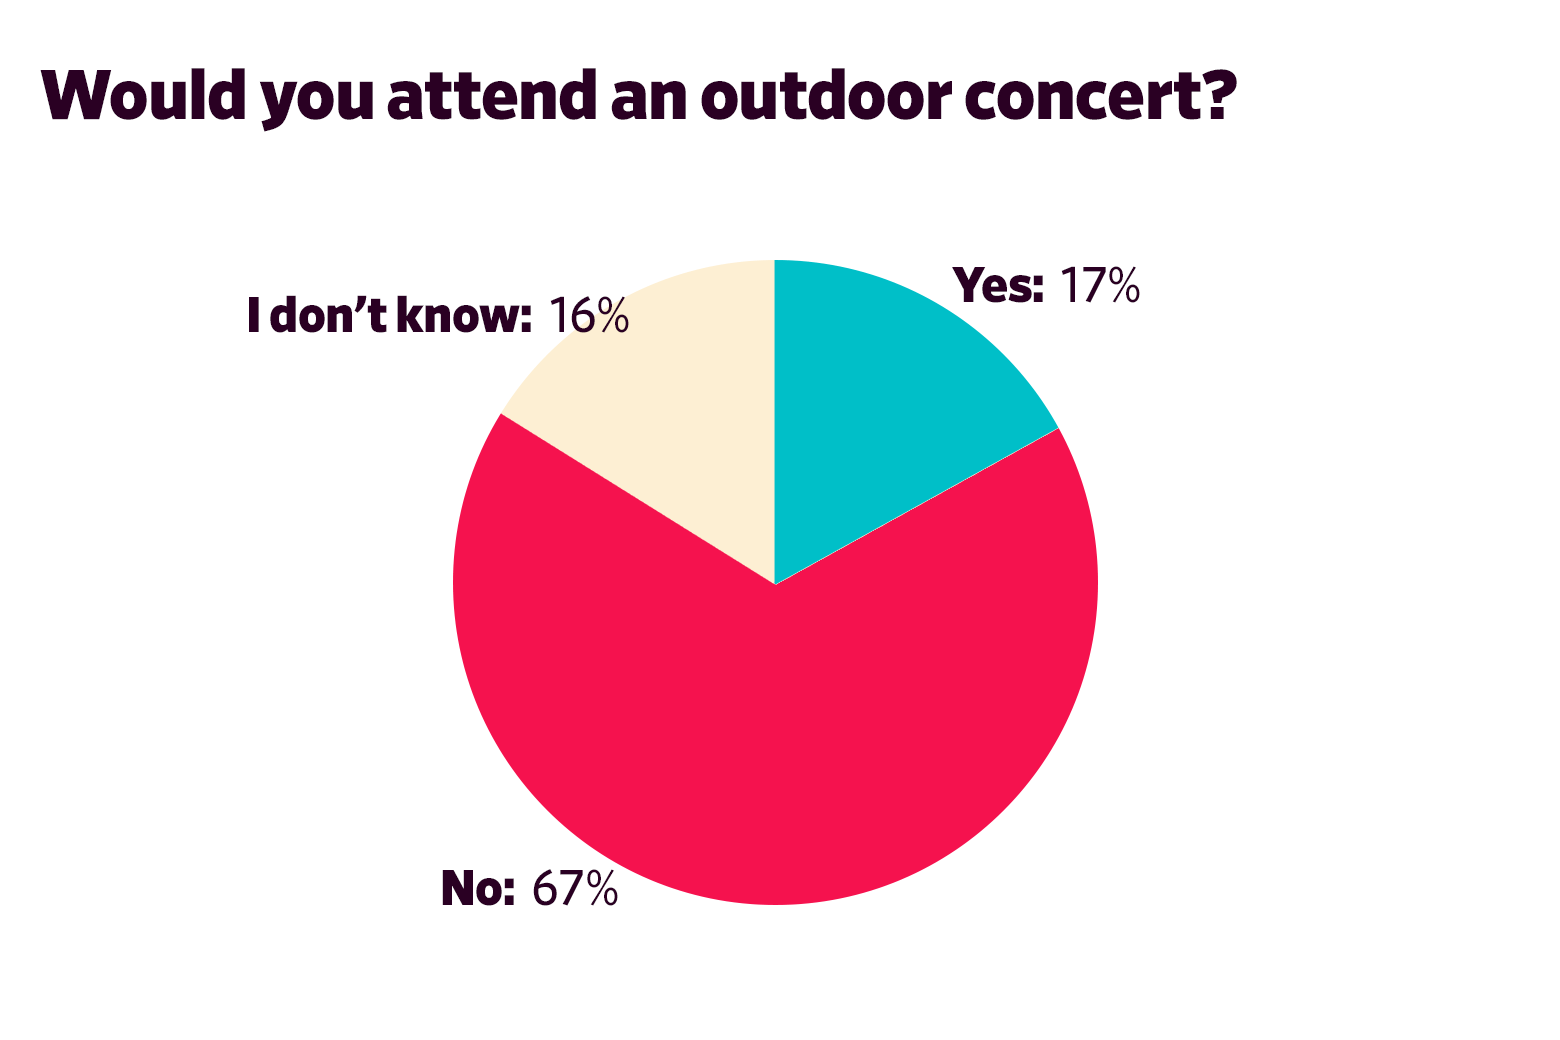 Would you attend an outdoor concert? Yes: 17 No: 67 I don’t know:  16